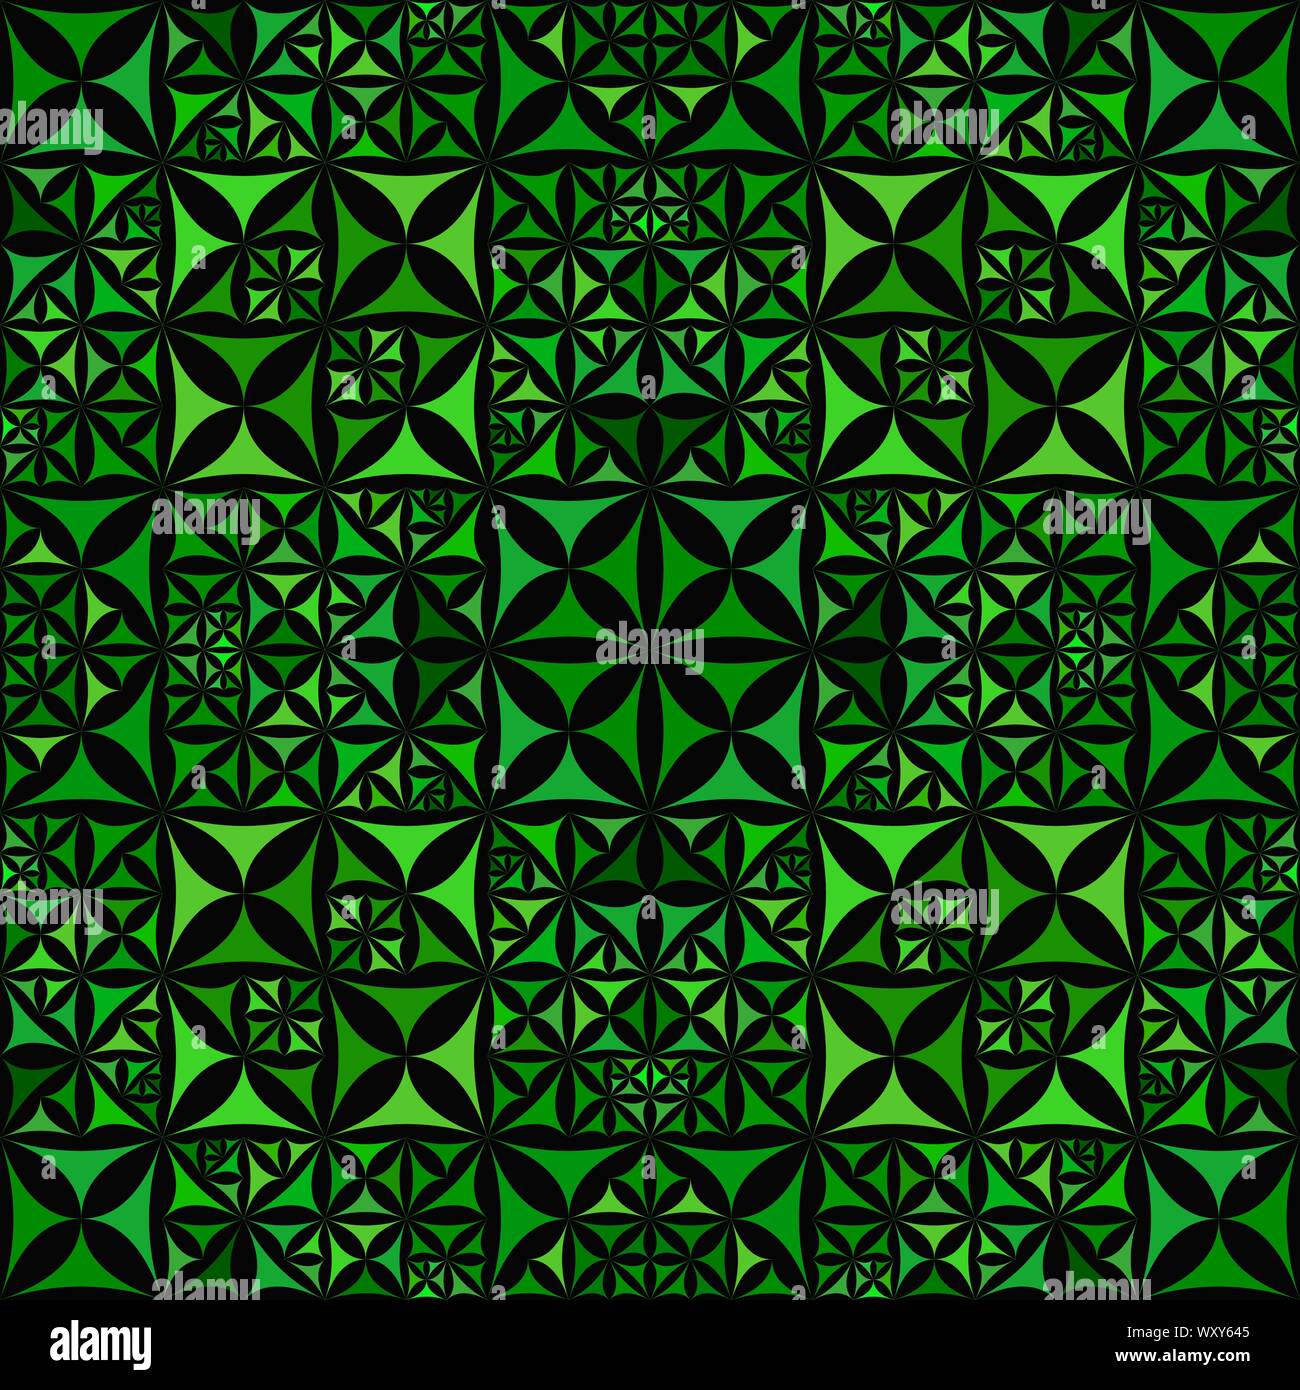 Green Abstract Repeating Curved Shape Kaleidoscope Pattern